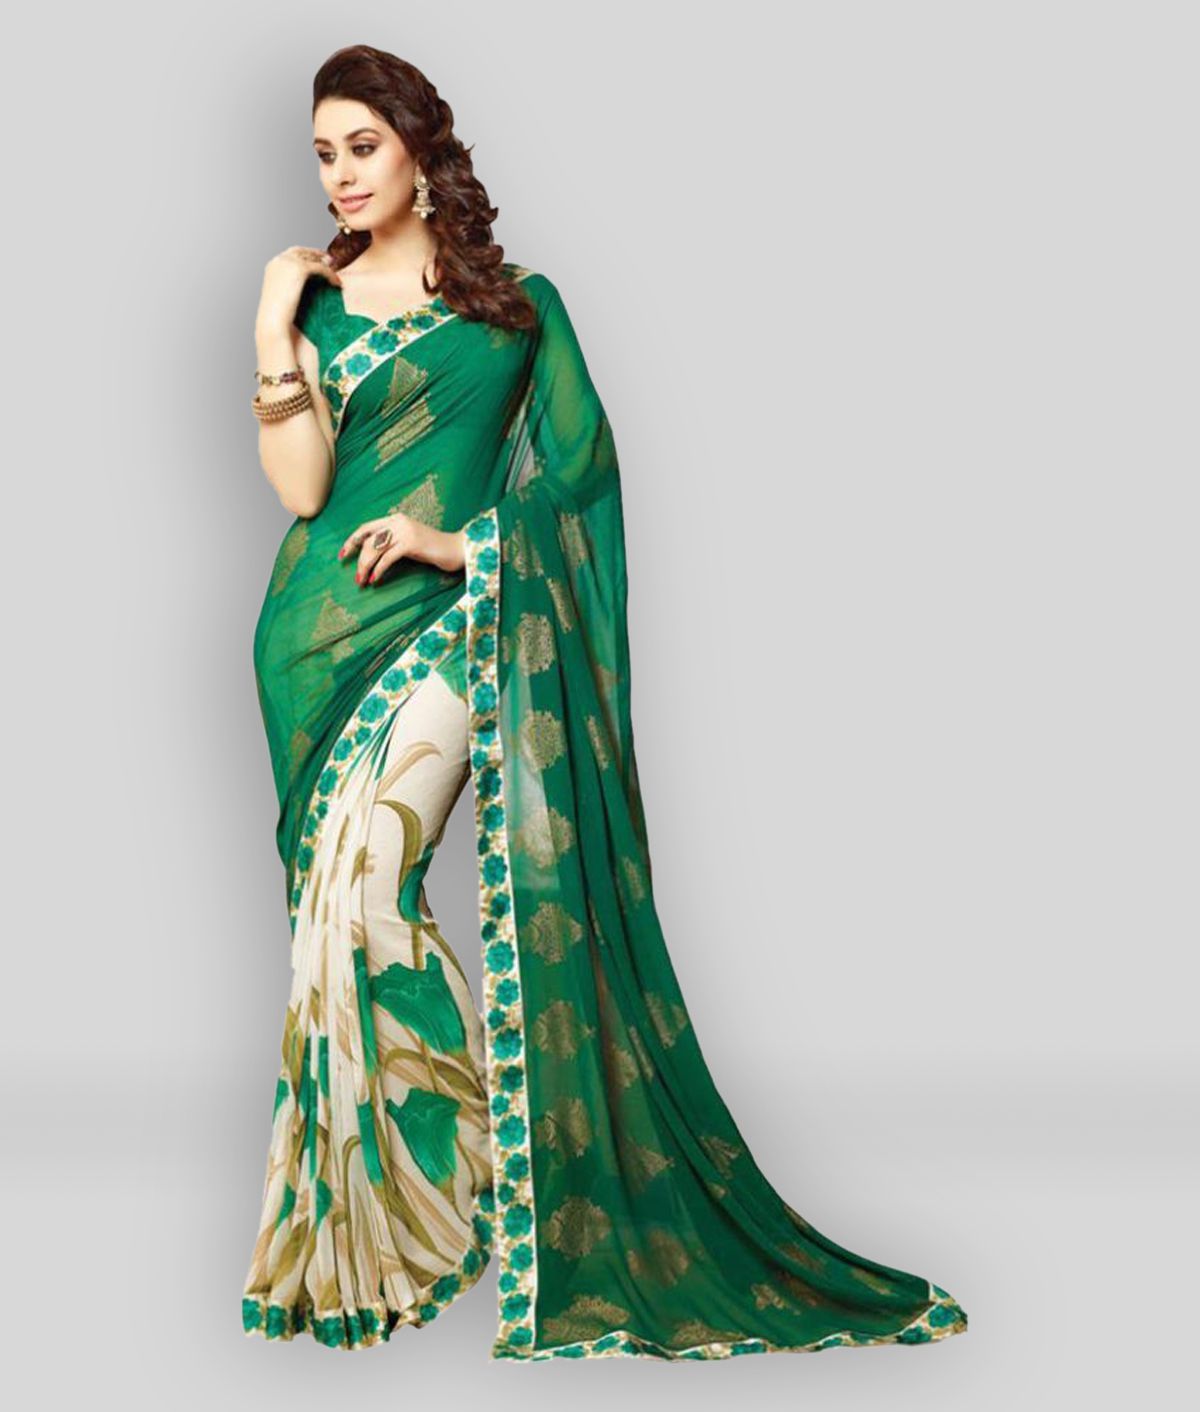     			Gazal Fashions - Multicolor Georgette Saree With Blouse Piece ( Pack of 1 )